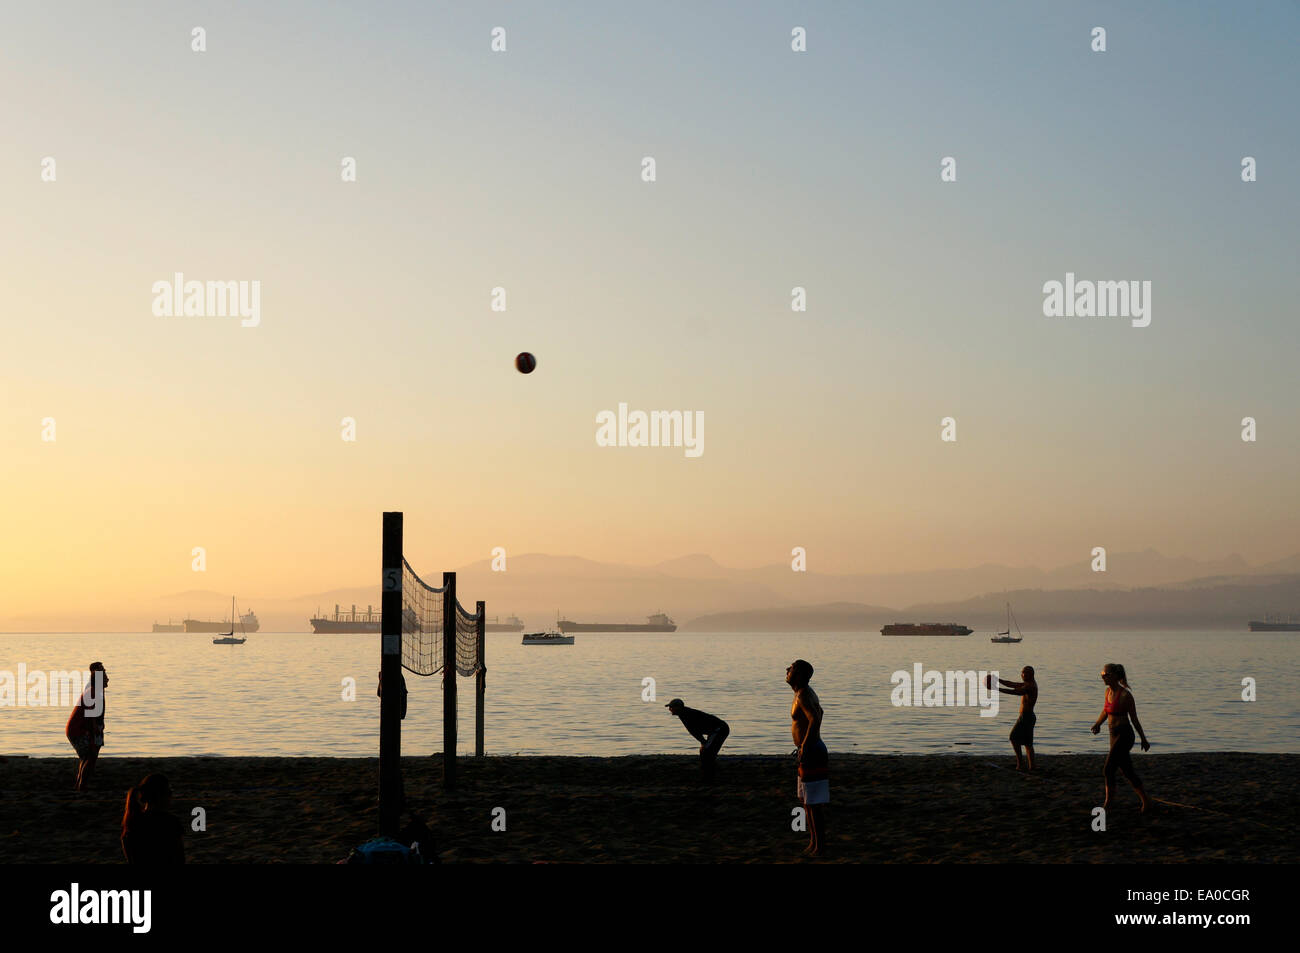 people-playing-beach-volleyball-at-sunse